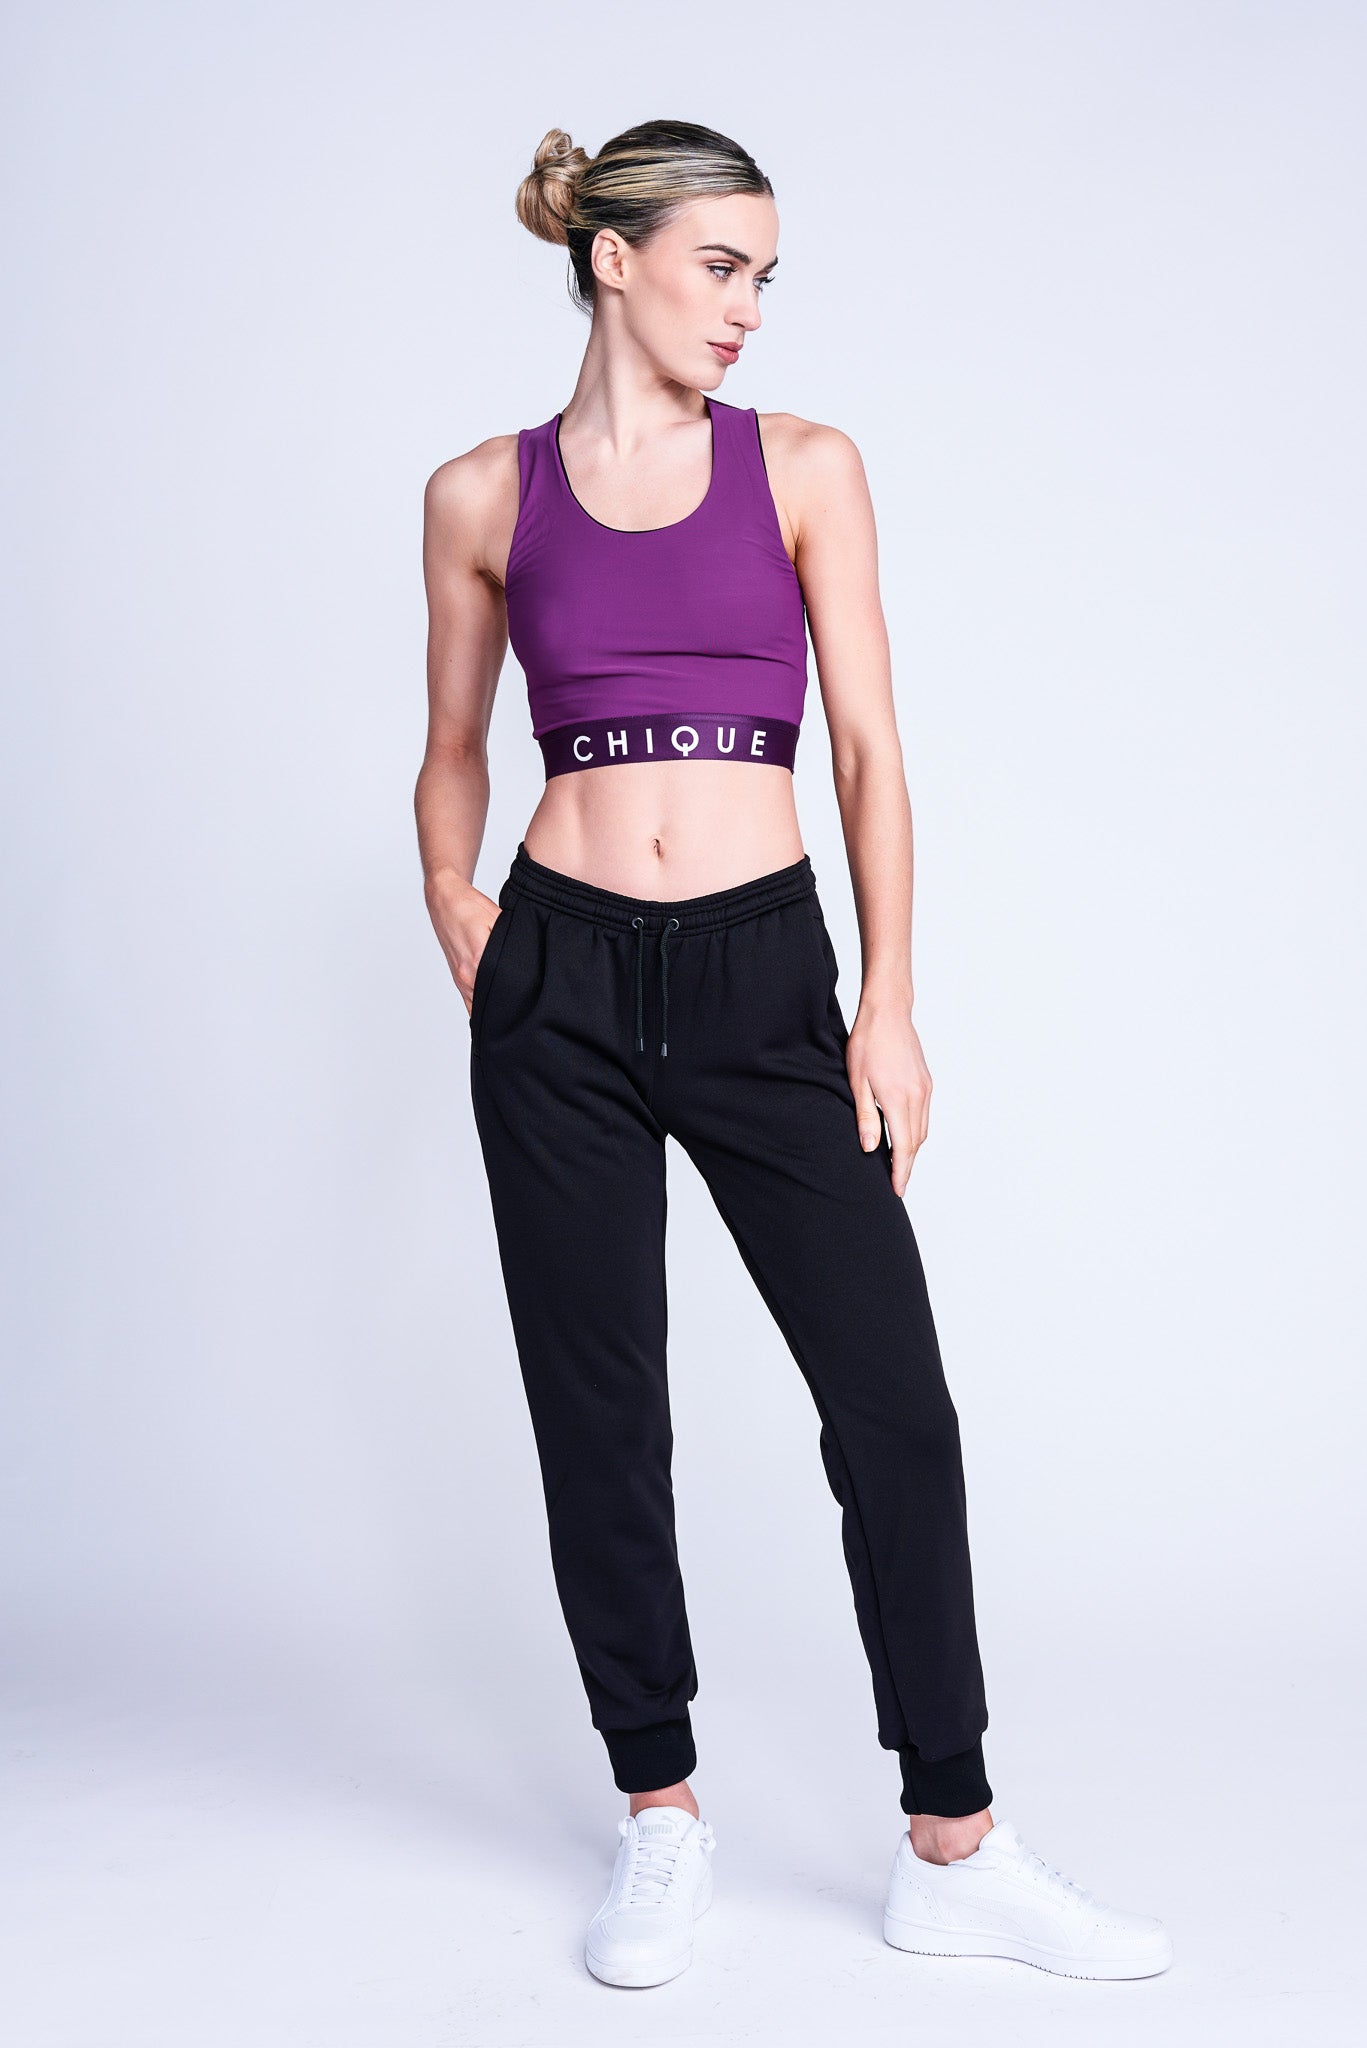 Women's Figure Skating Empower Tank Top in Berry